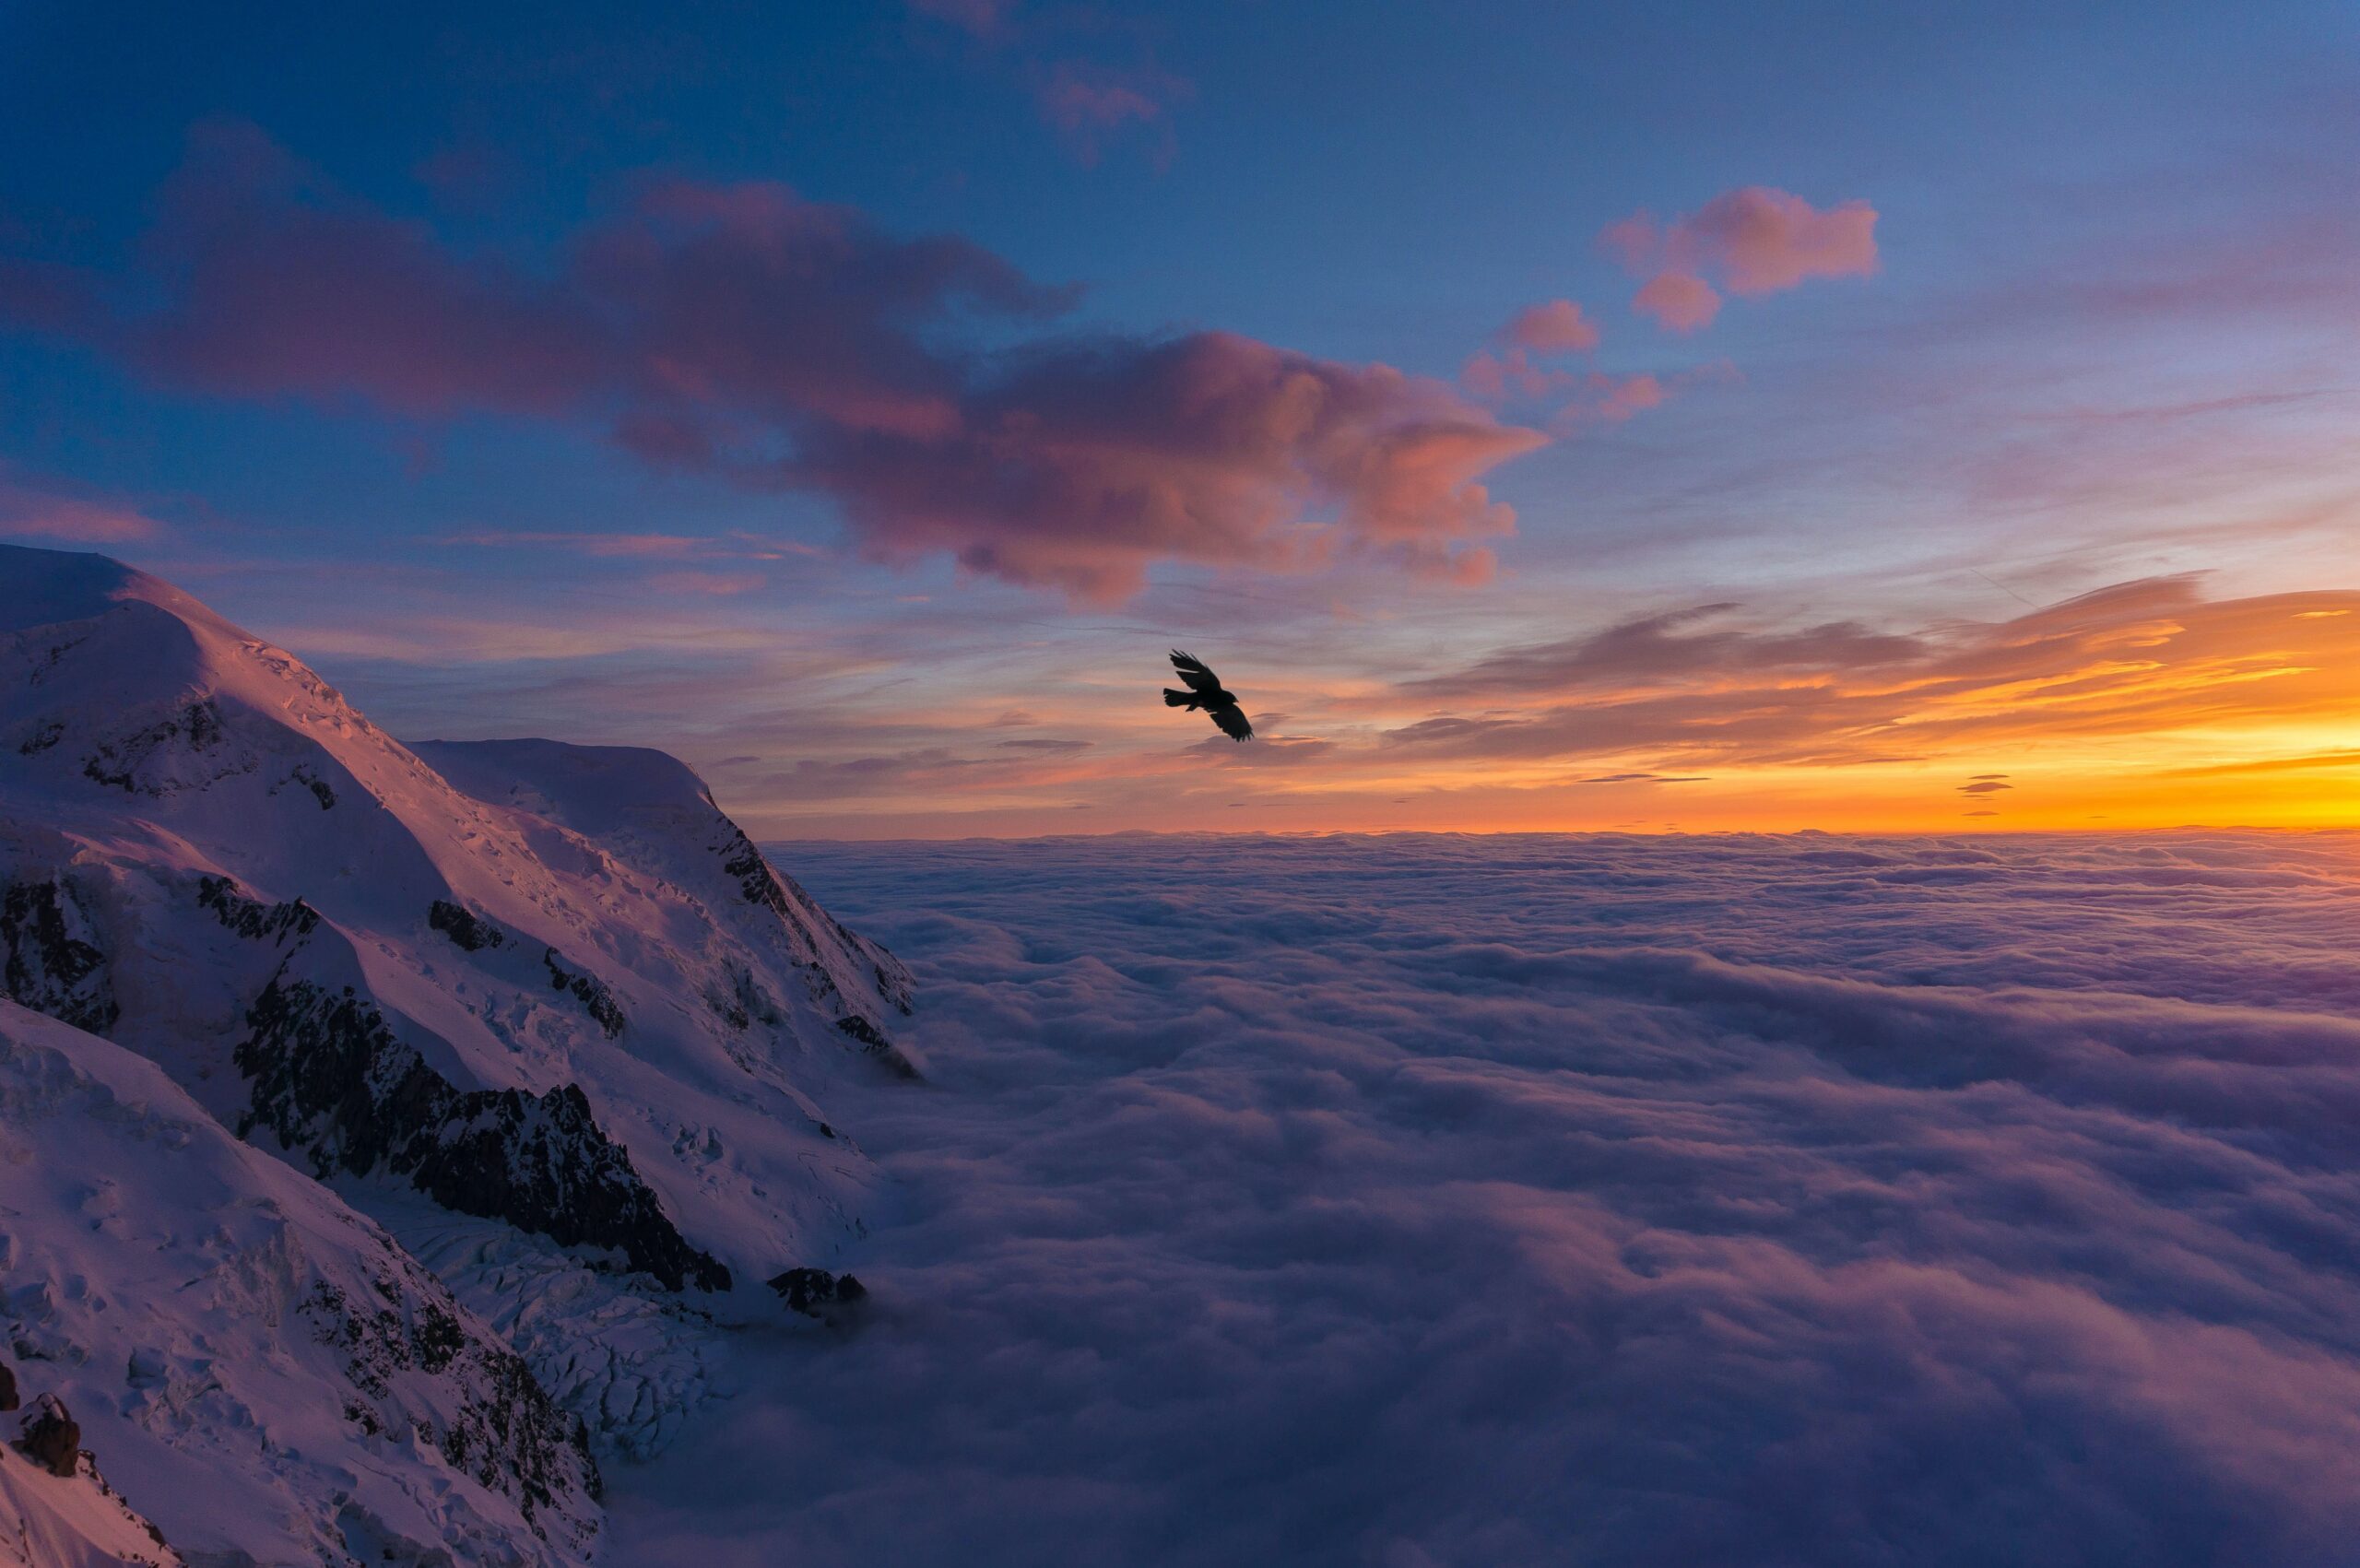 Eagle flying over clouds with mountain peaks on the right hand side.